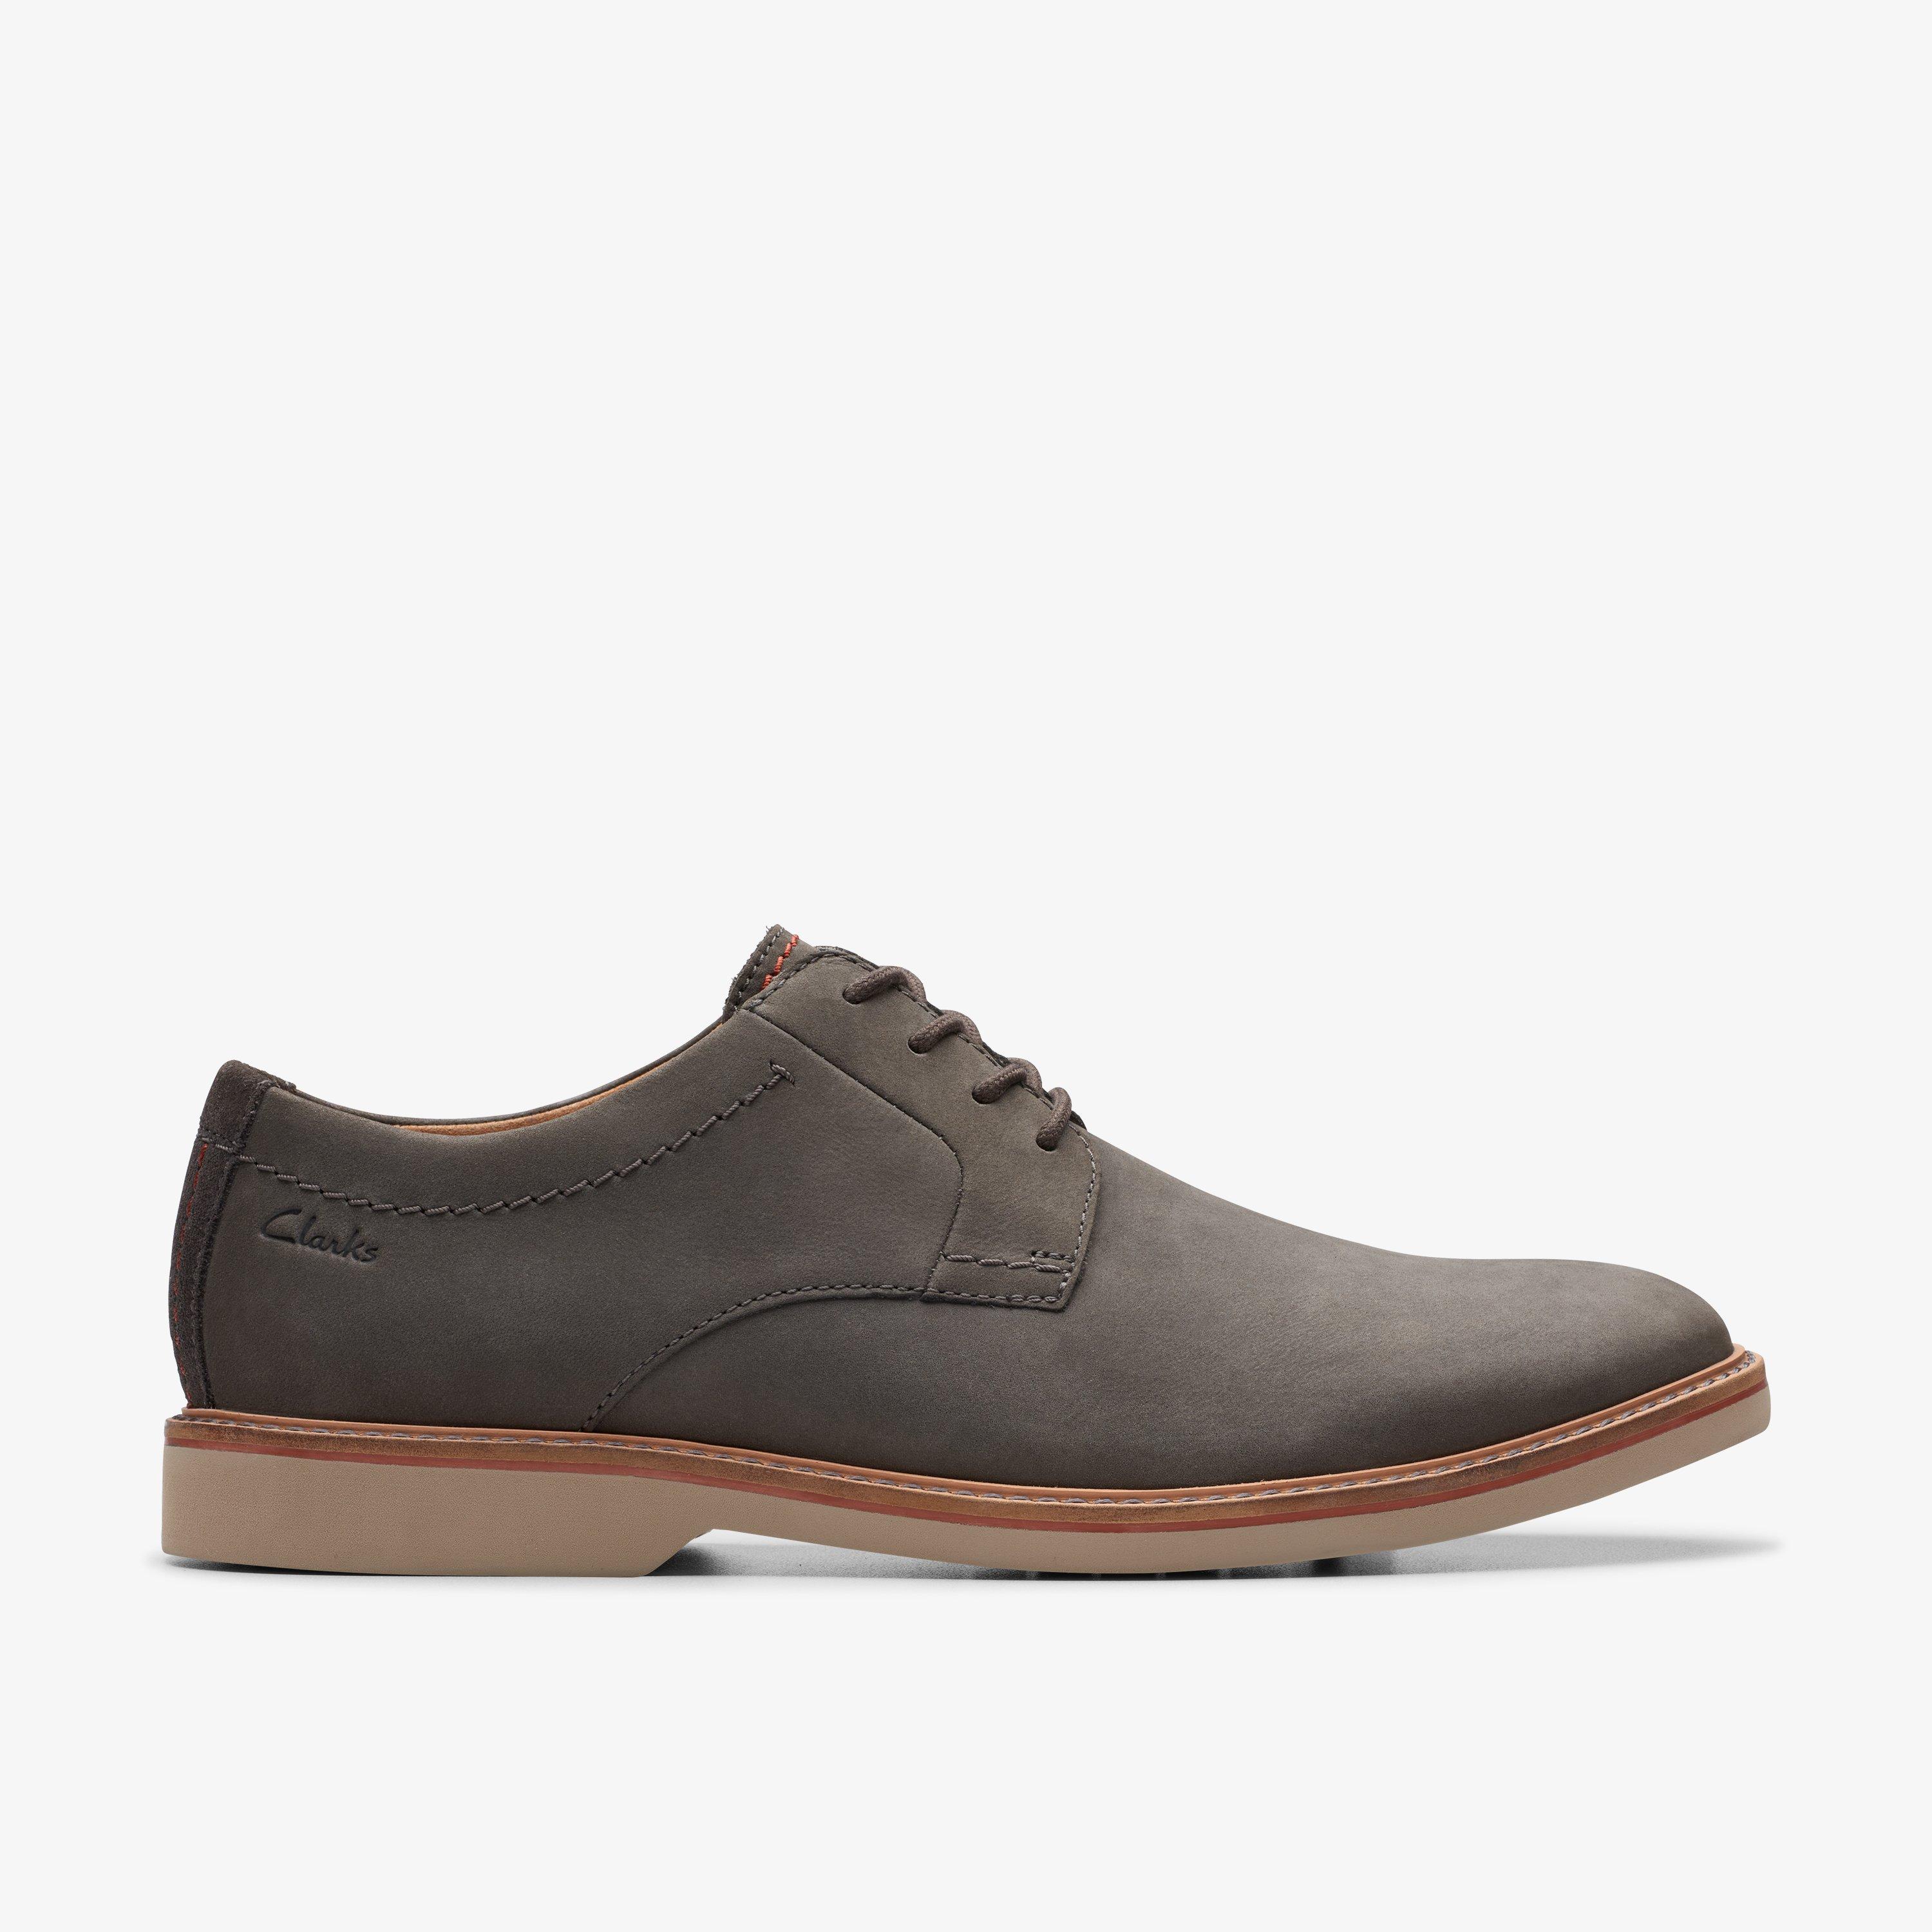 Introduction to Clarks Oxford Shoes